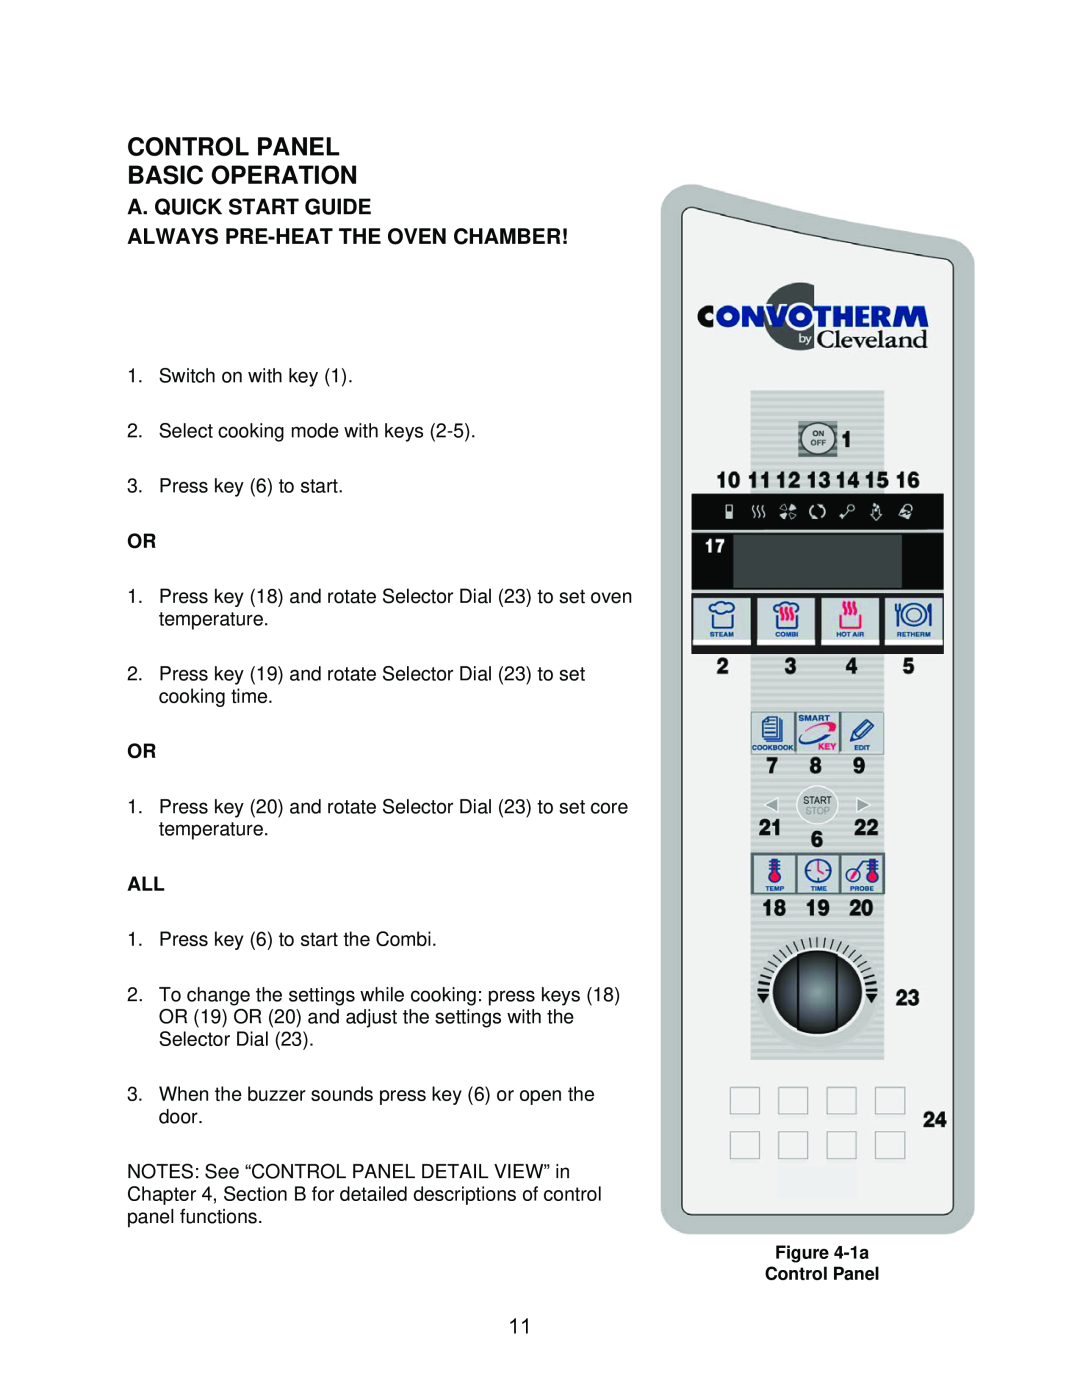 Cleveland Range OES-20.20, OEB-20.20 Control Panel Basic Operation, A. Quick Start Guide, Always Pre-Heatthe Oven Chamber 